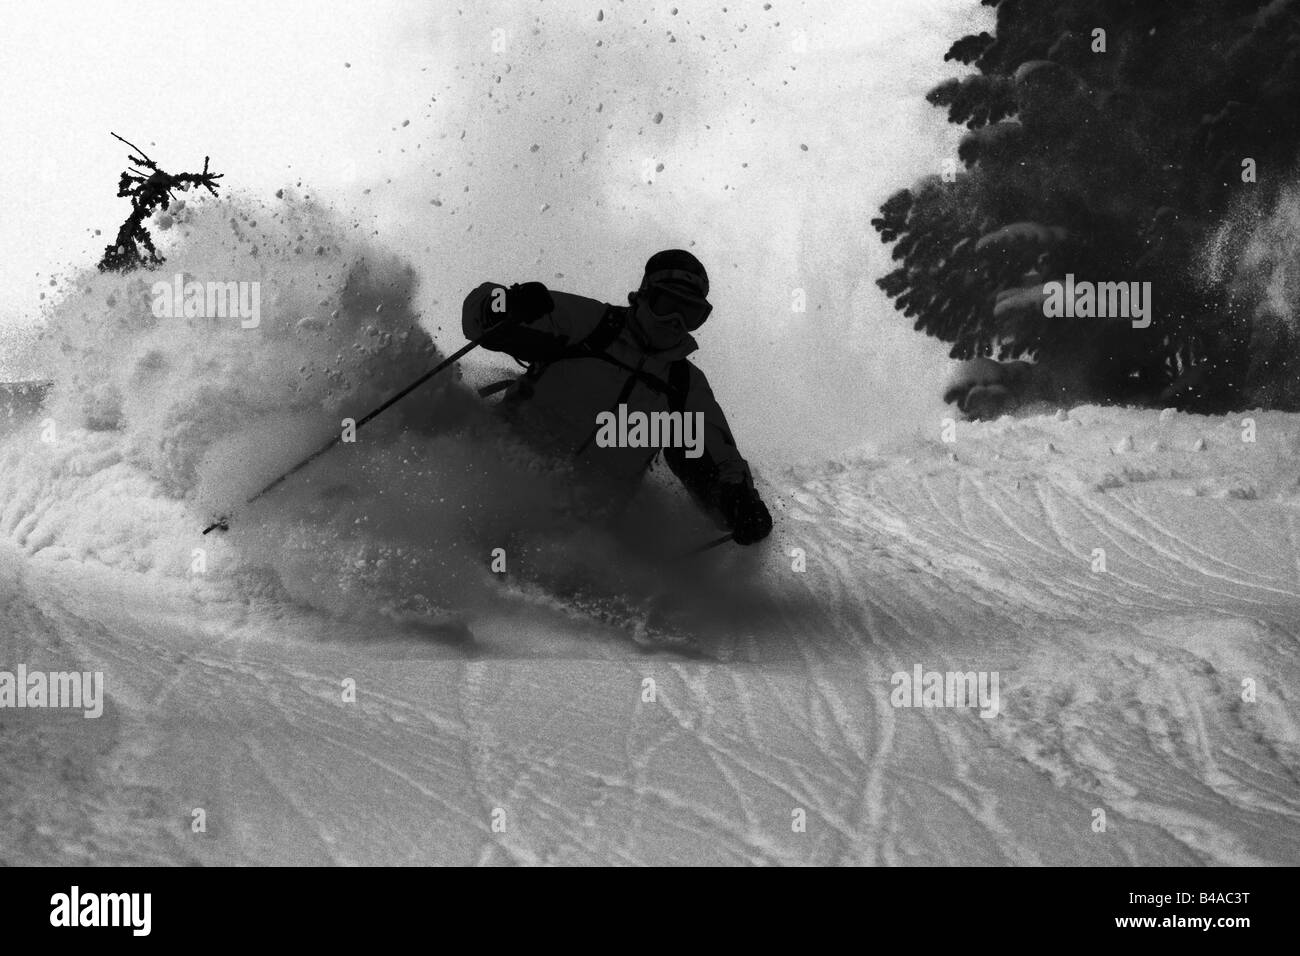 A skier in deep powder with a large spray of snow Stock Photo